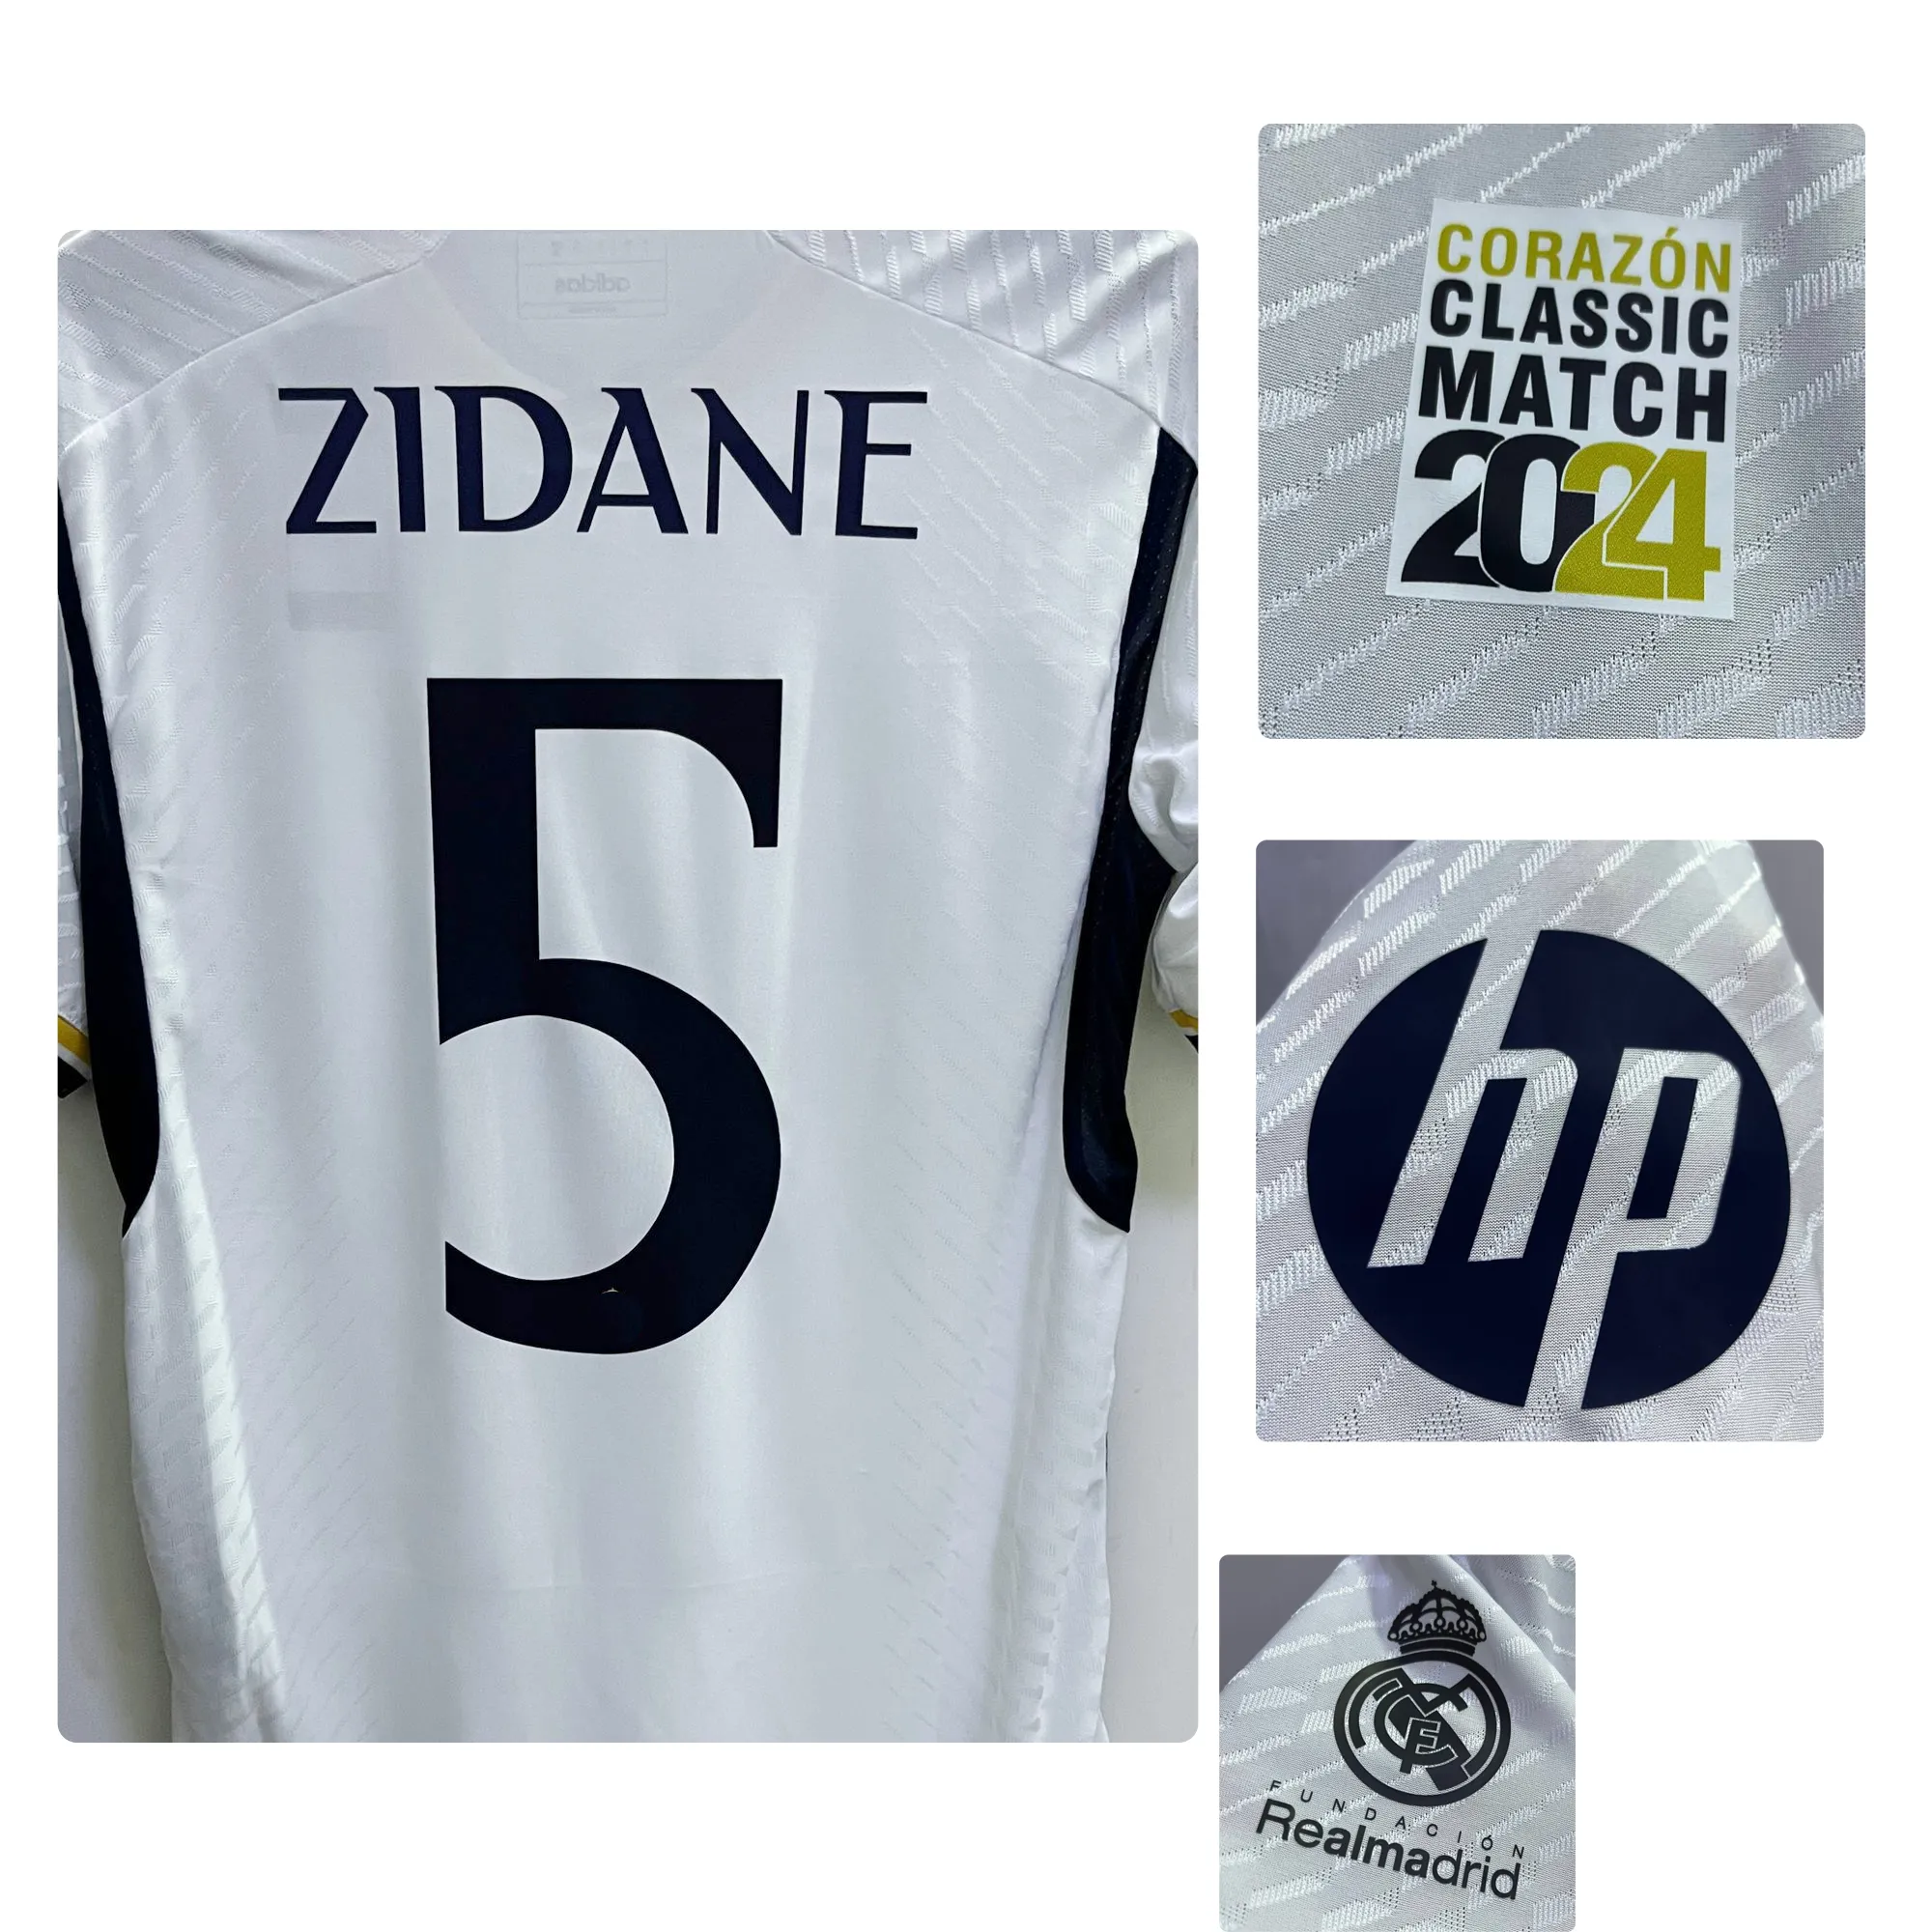 American College Football Wear 2024 Legends Zidane Raul Maillot Corazon Classic Match 2024 Figo Player Issue with All Sponsor Jersey